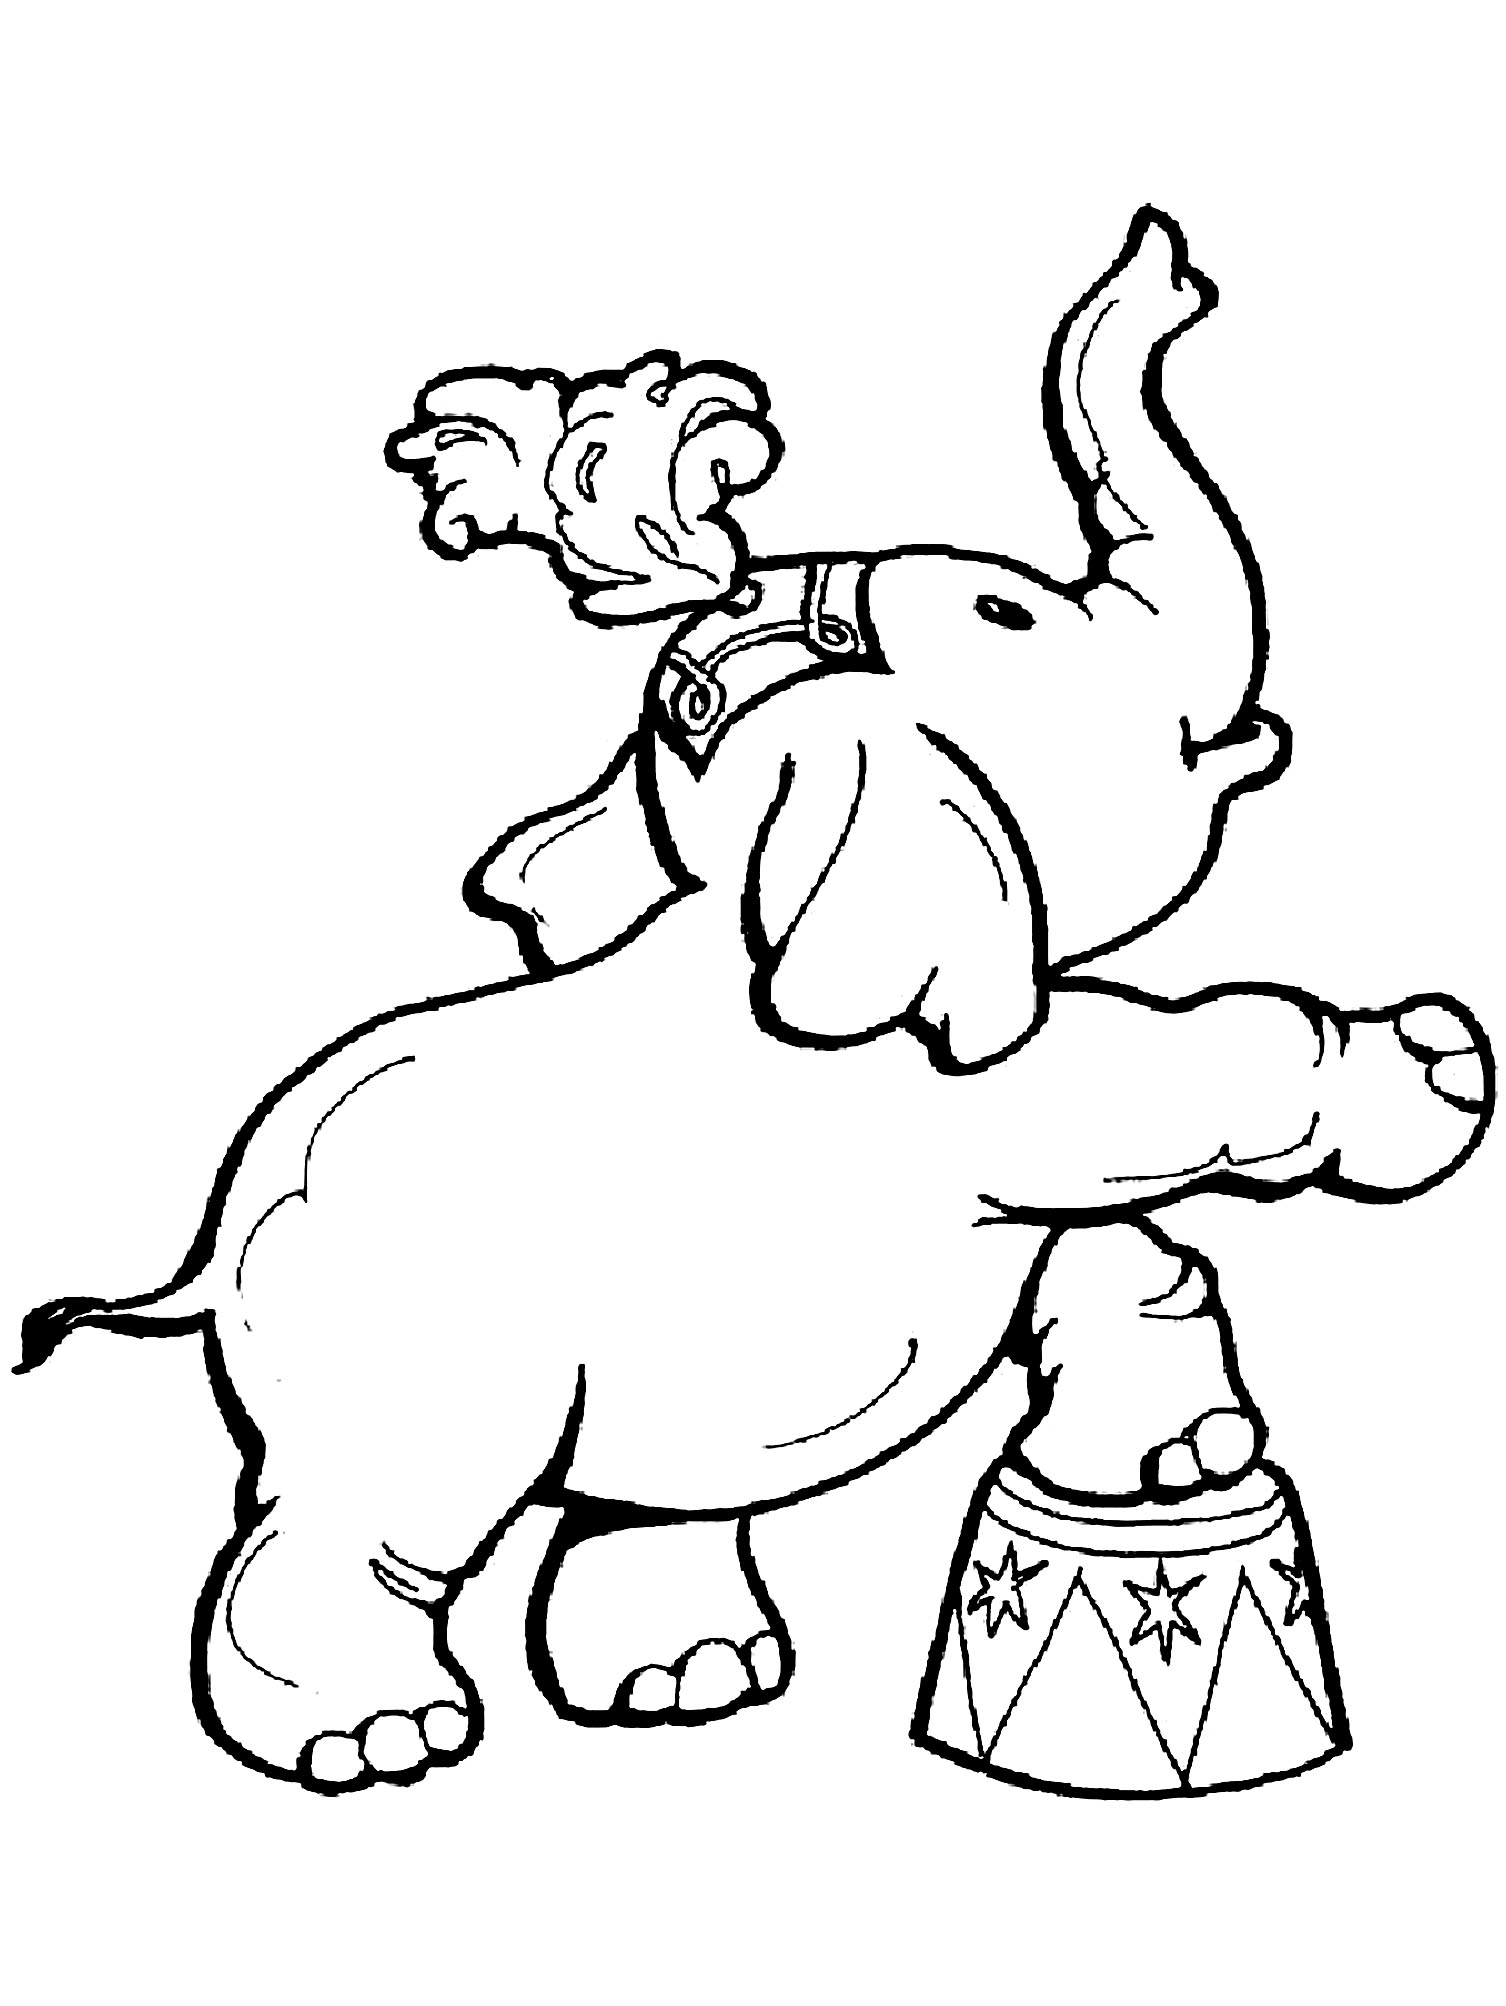 Free Circus Coloring Pages To Color - Circus Kids Coloring Pages